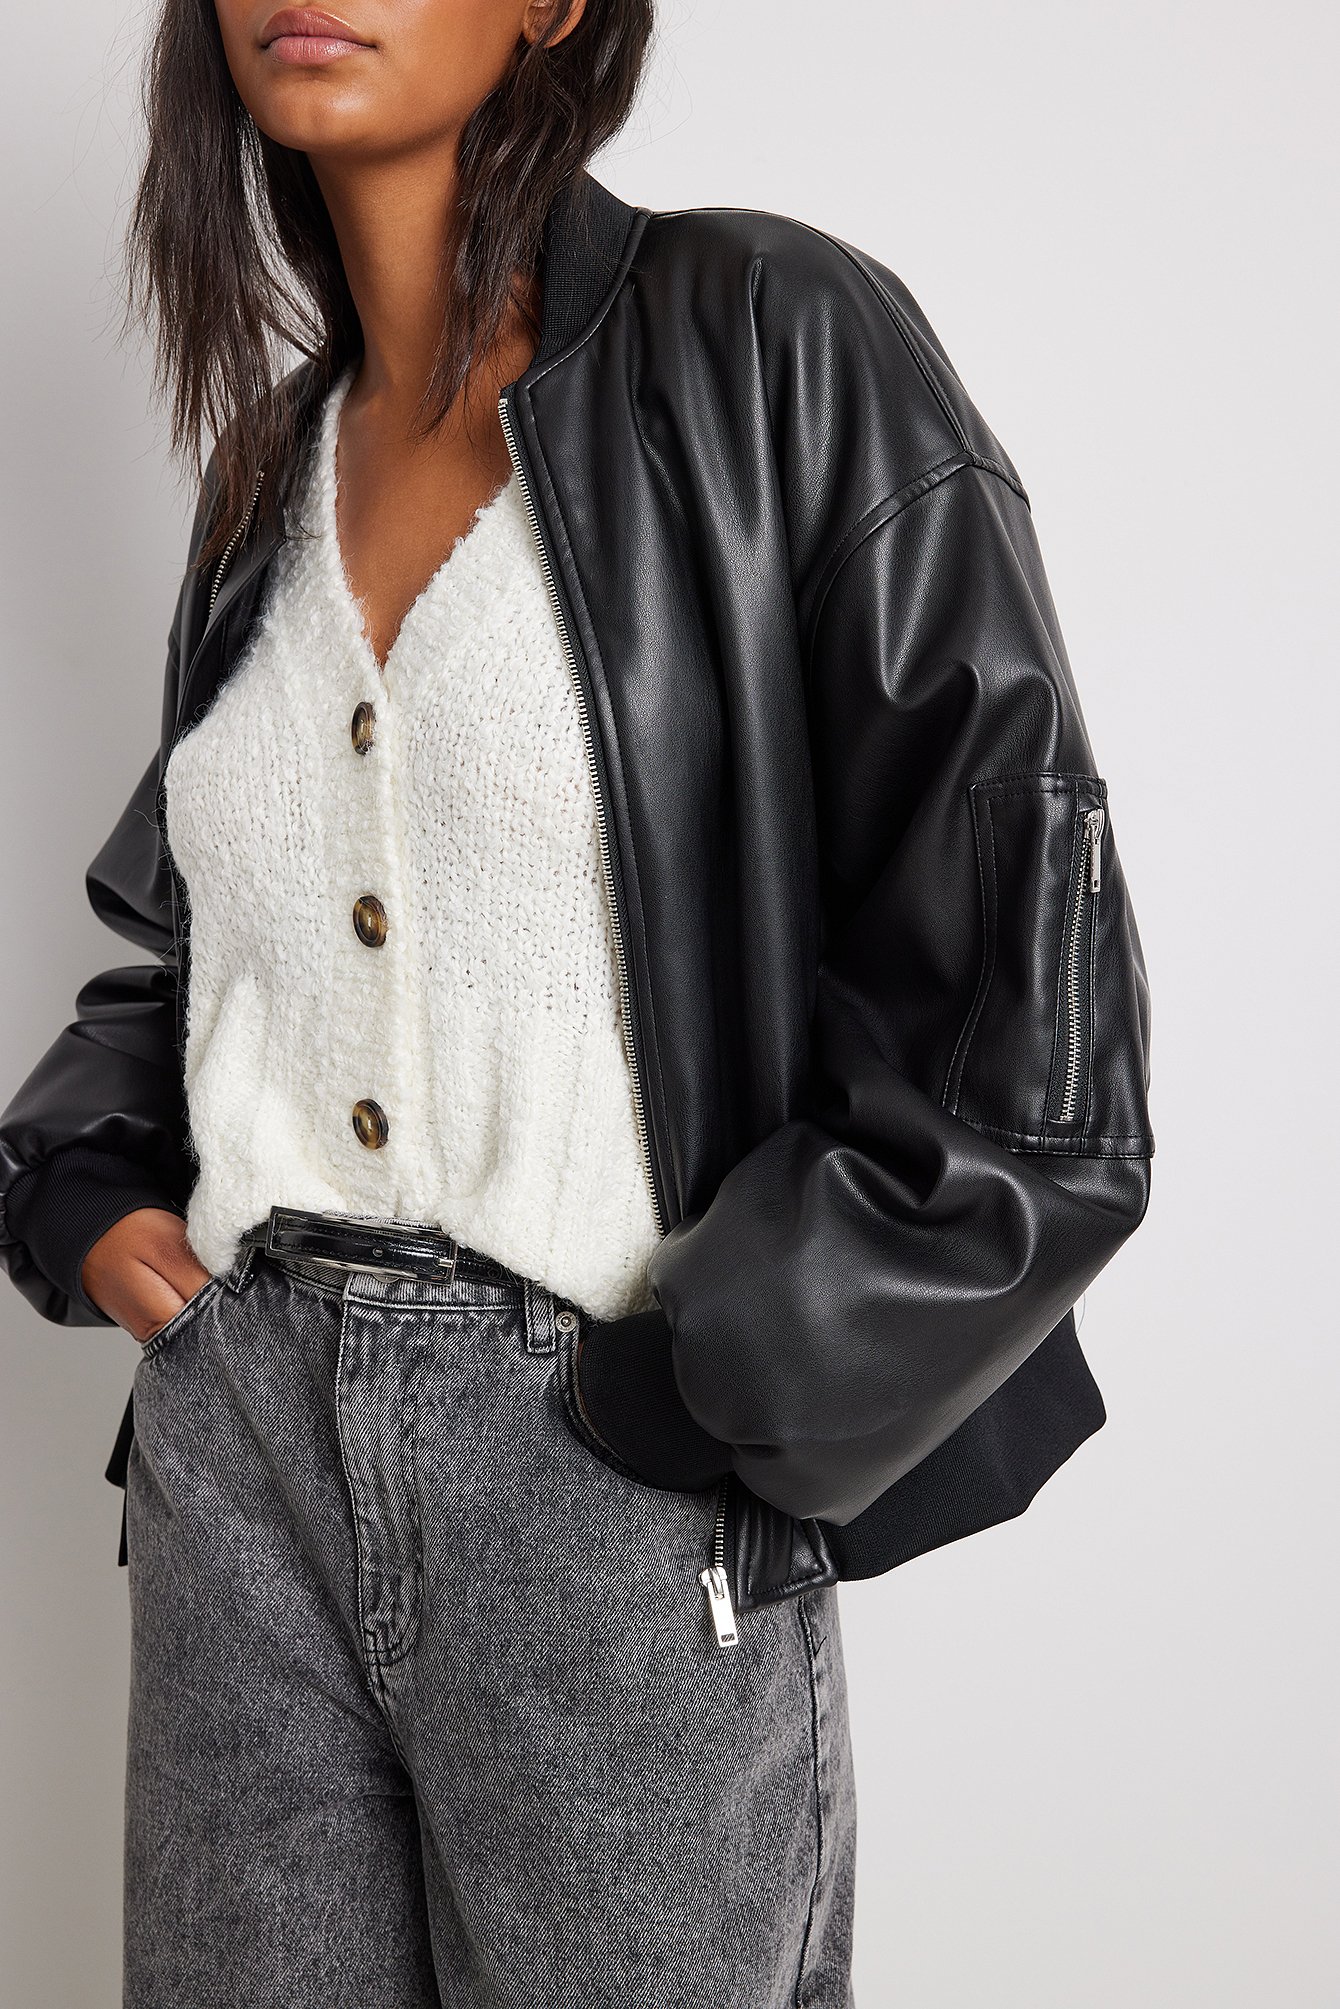 Offwhite Chunky Knitted Cropped Cardigan